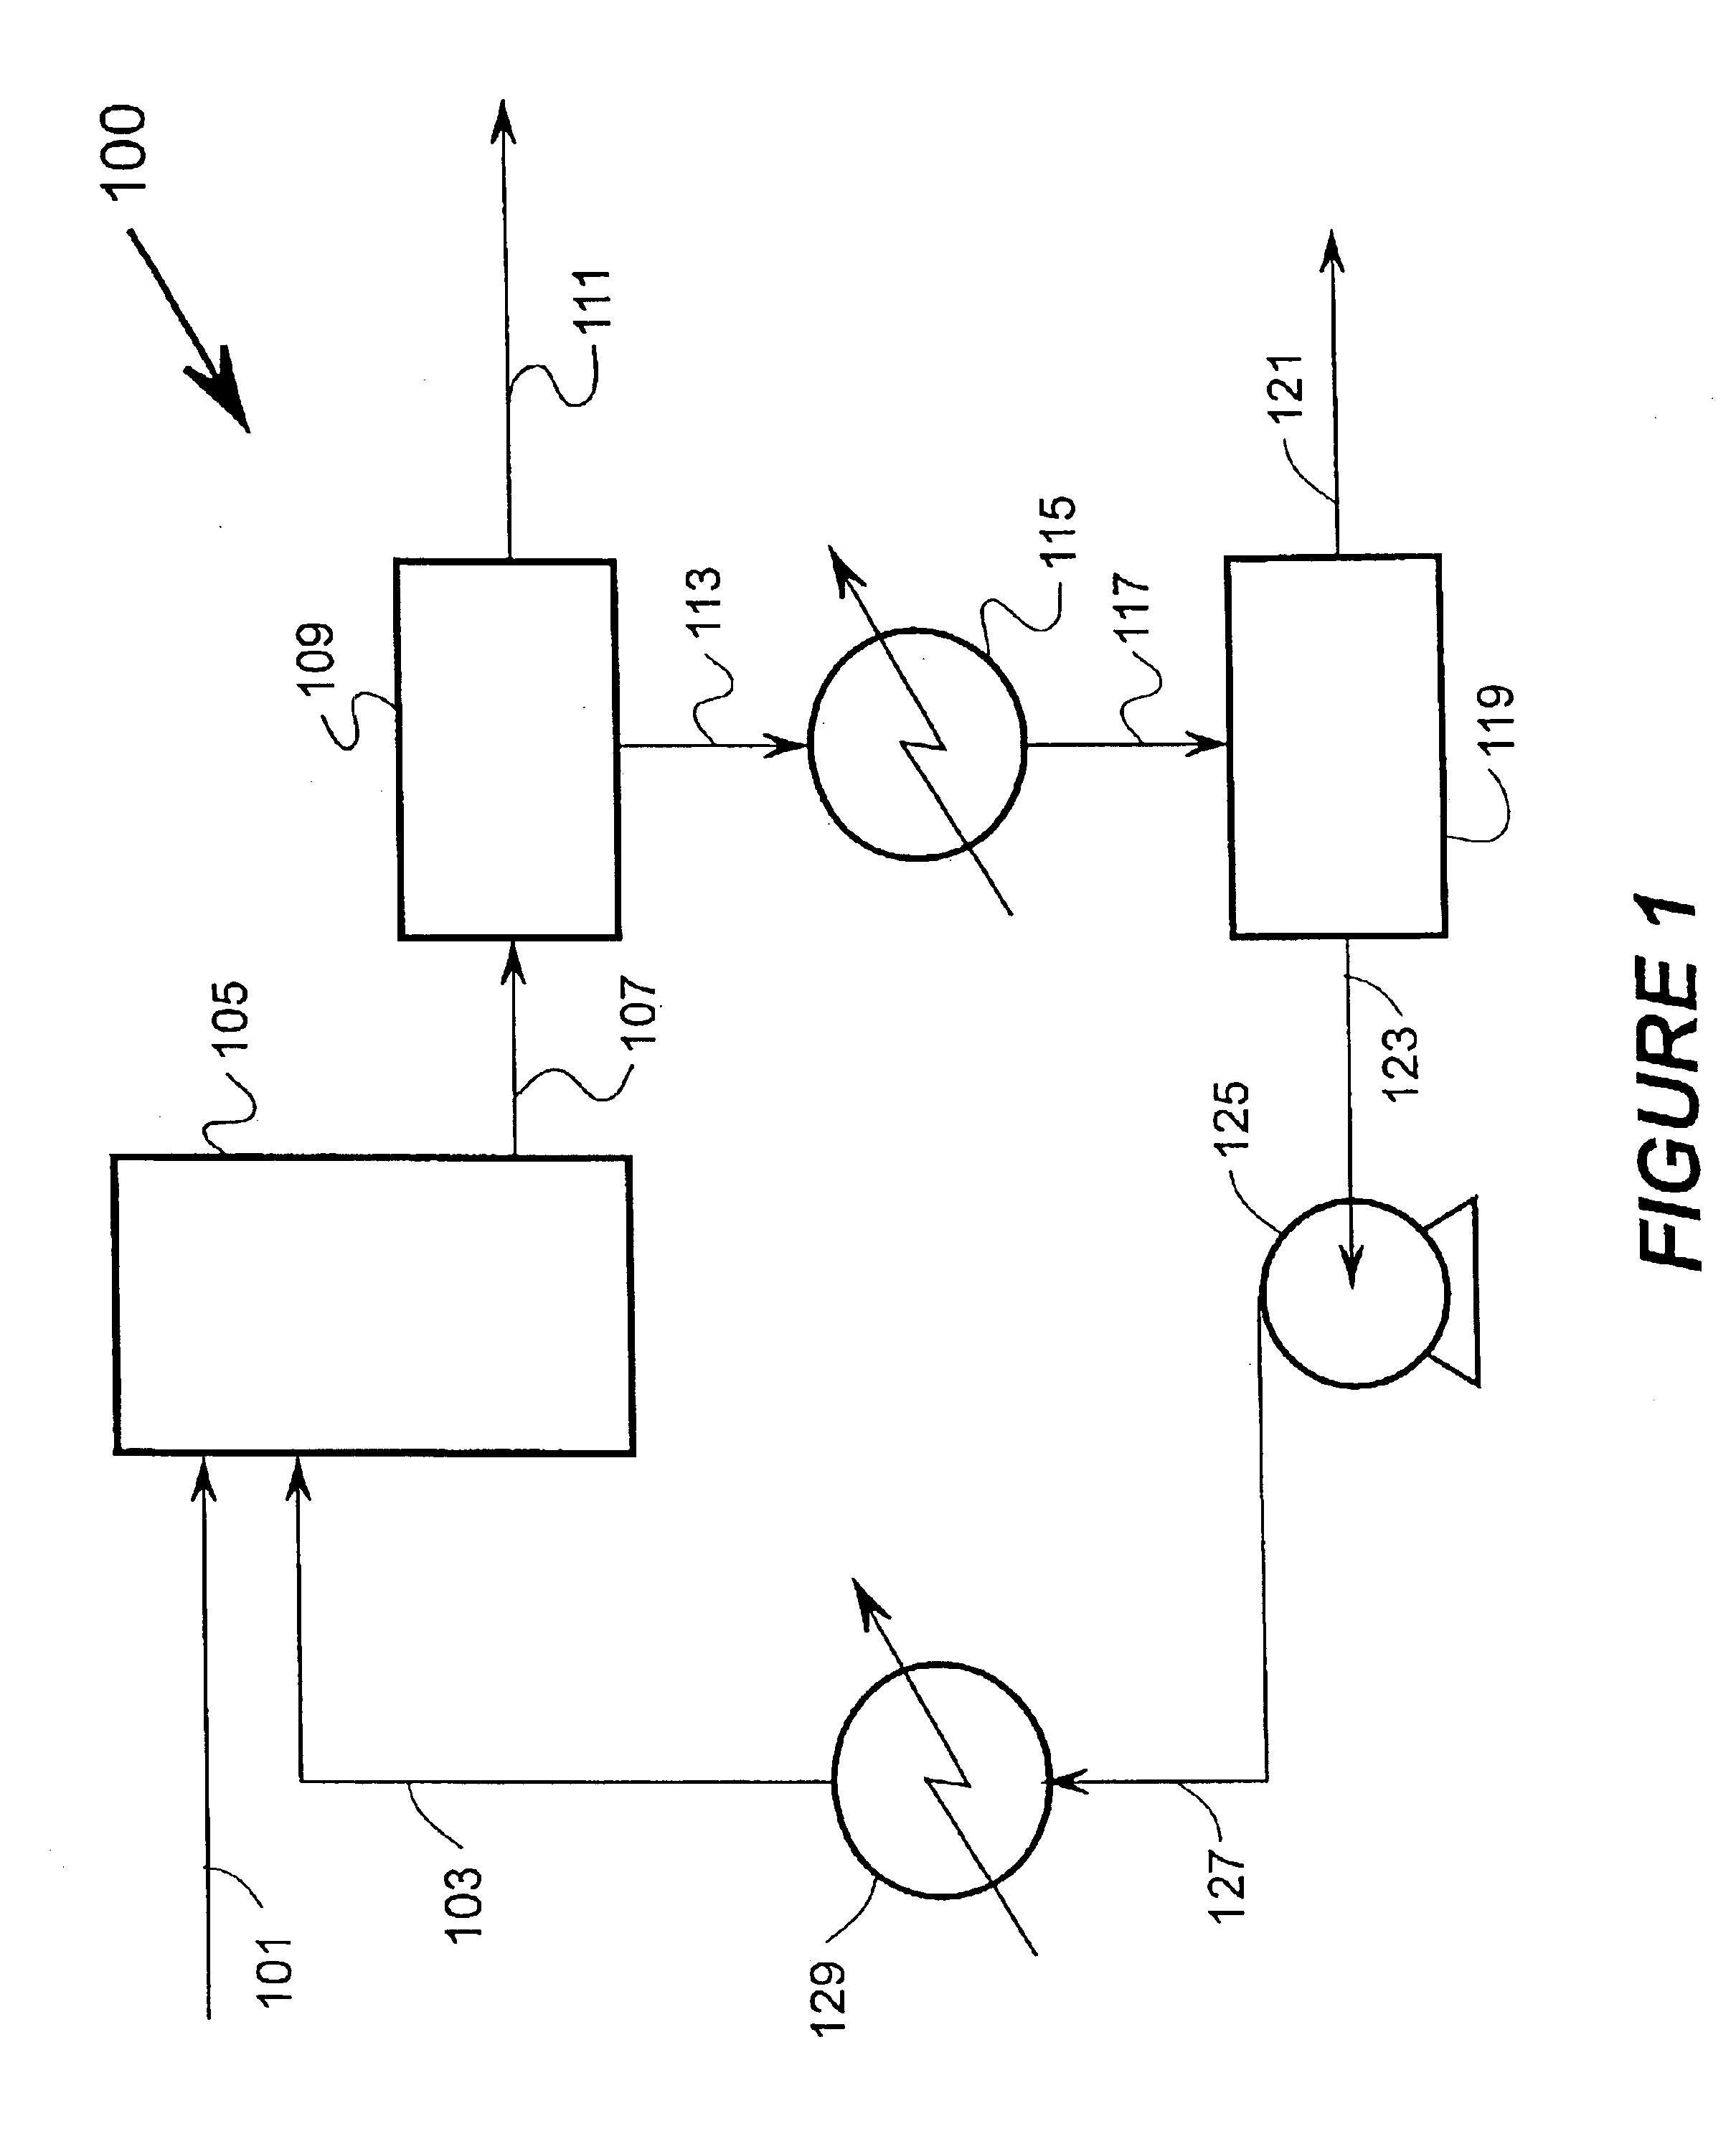 Apparatus and method for ammonia removal from waste streams